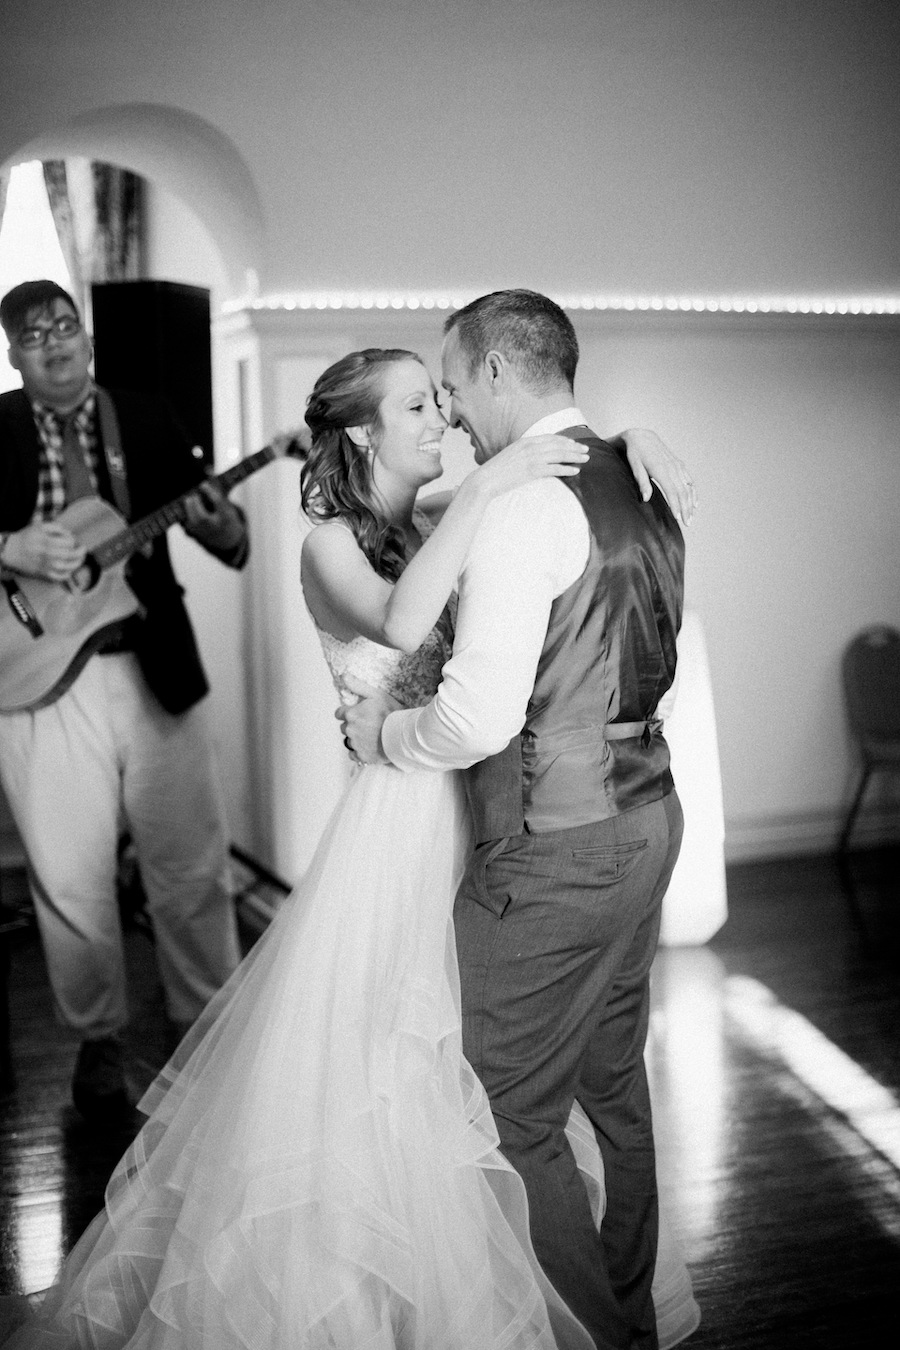 Bride and groom sharing their first dance